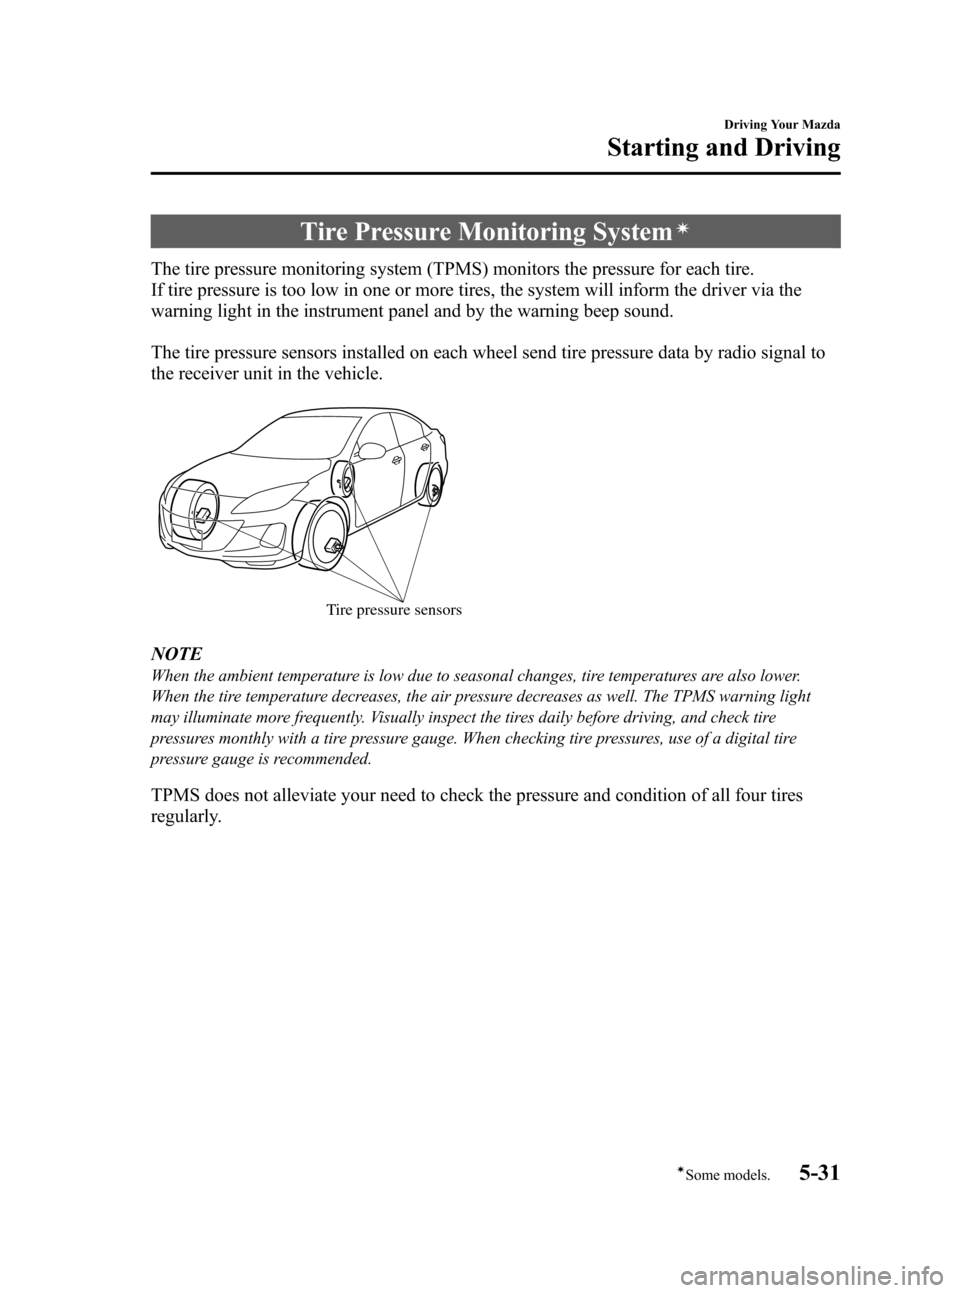 MAZDA MODEL 3 HATCHBACK 2012  Owners Manual (in English) Black plate (193,1)
Tire Pressure Monitoring Systemí
The tire pressure monitoring system (TPMS) monitors the pressure for each tire.
If tire pressure is too low in one or more tires, the system will 